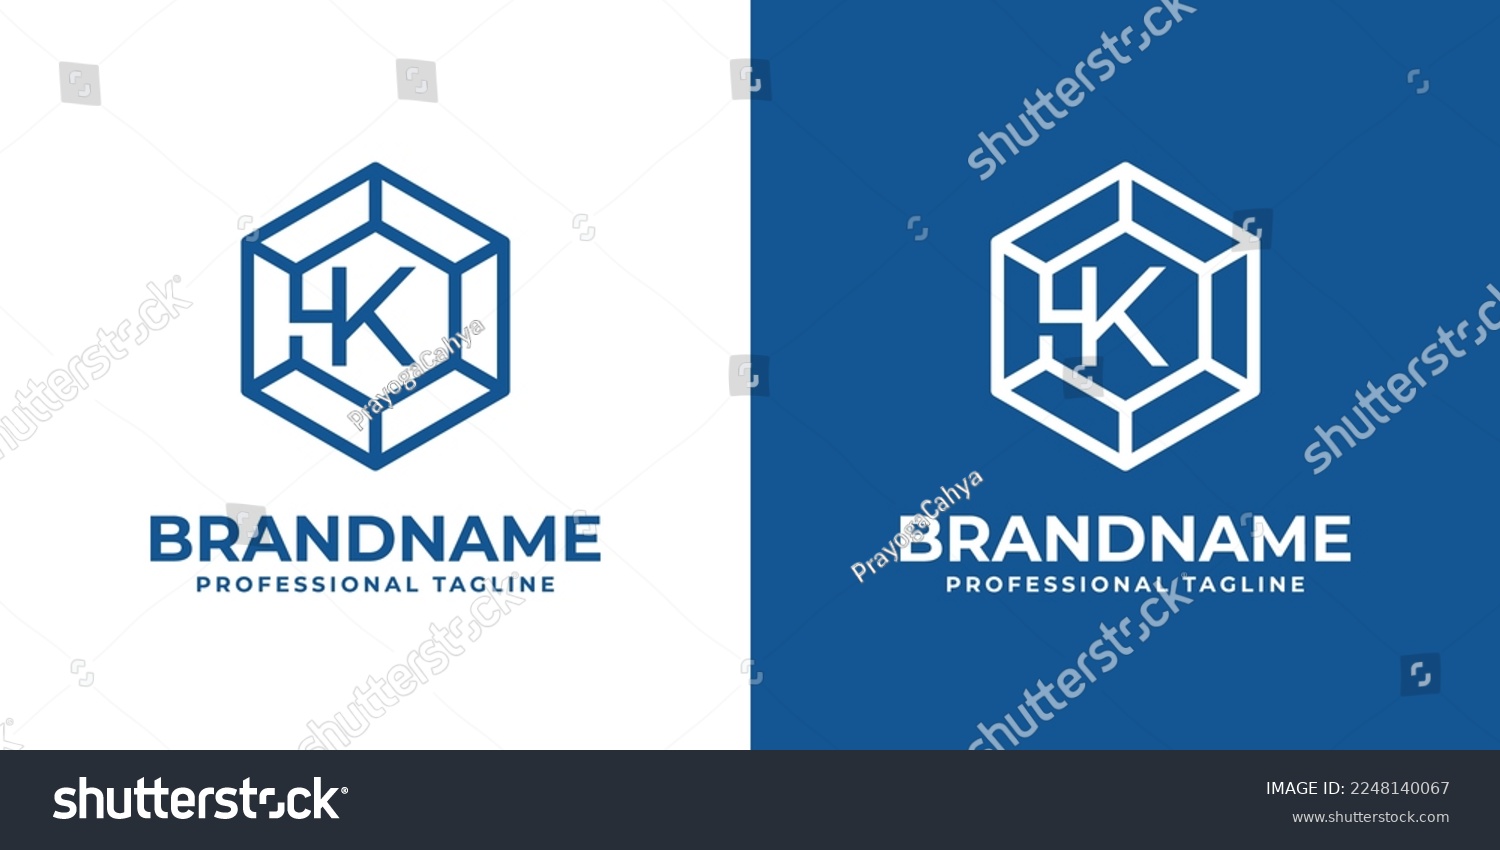 SVG of Initial K Hexagon Diamond Logo, suitable for any business with K initial. svg